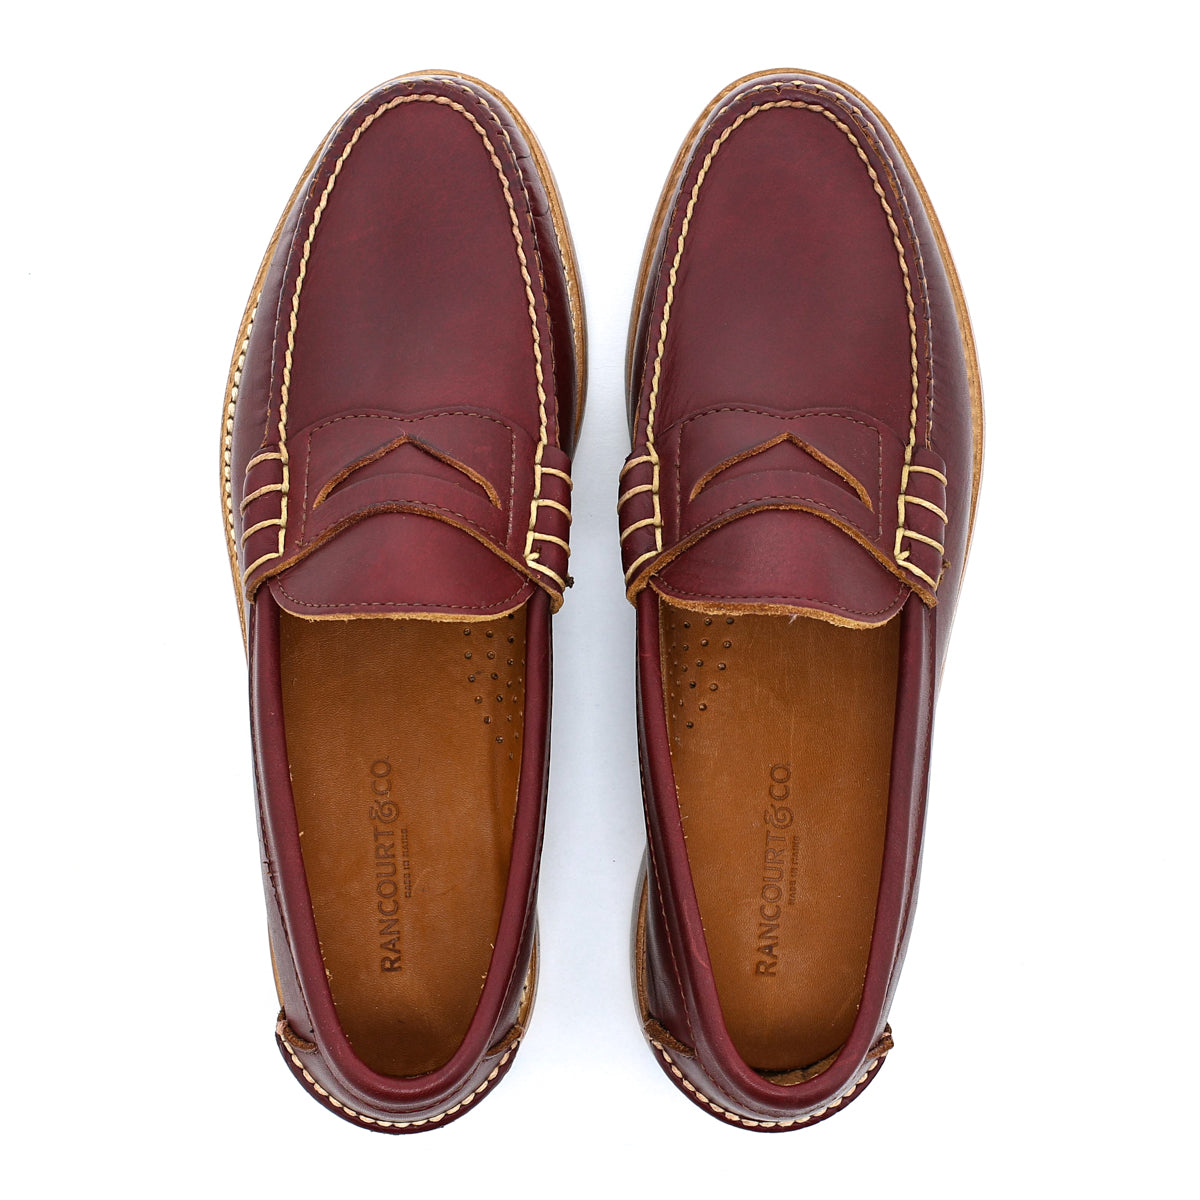 Beefroll Penny Loafers - Natural Chromexcel, Rancourt & Co.